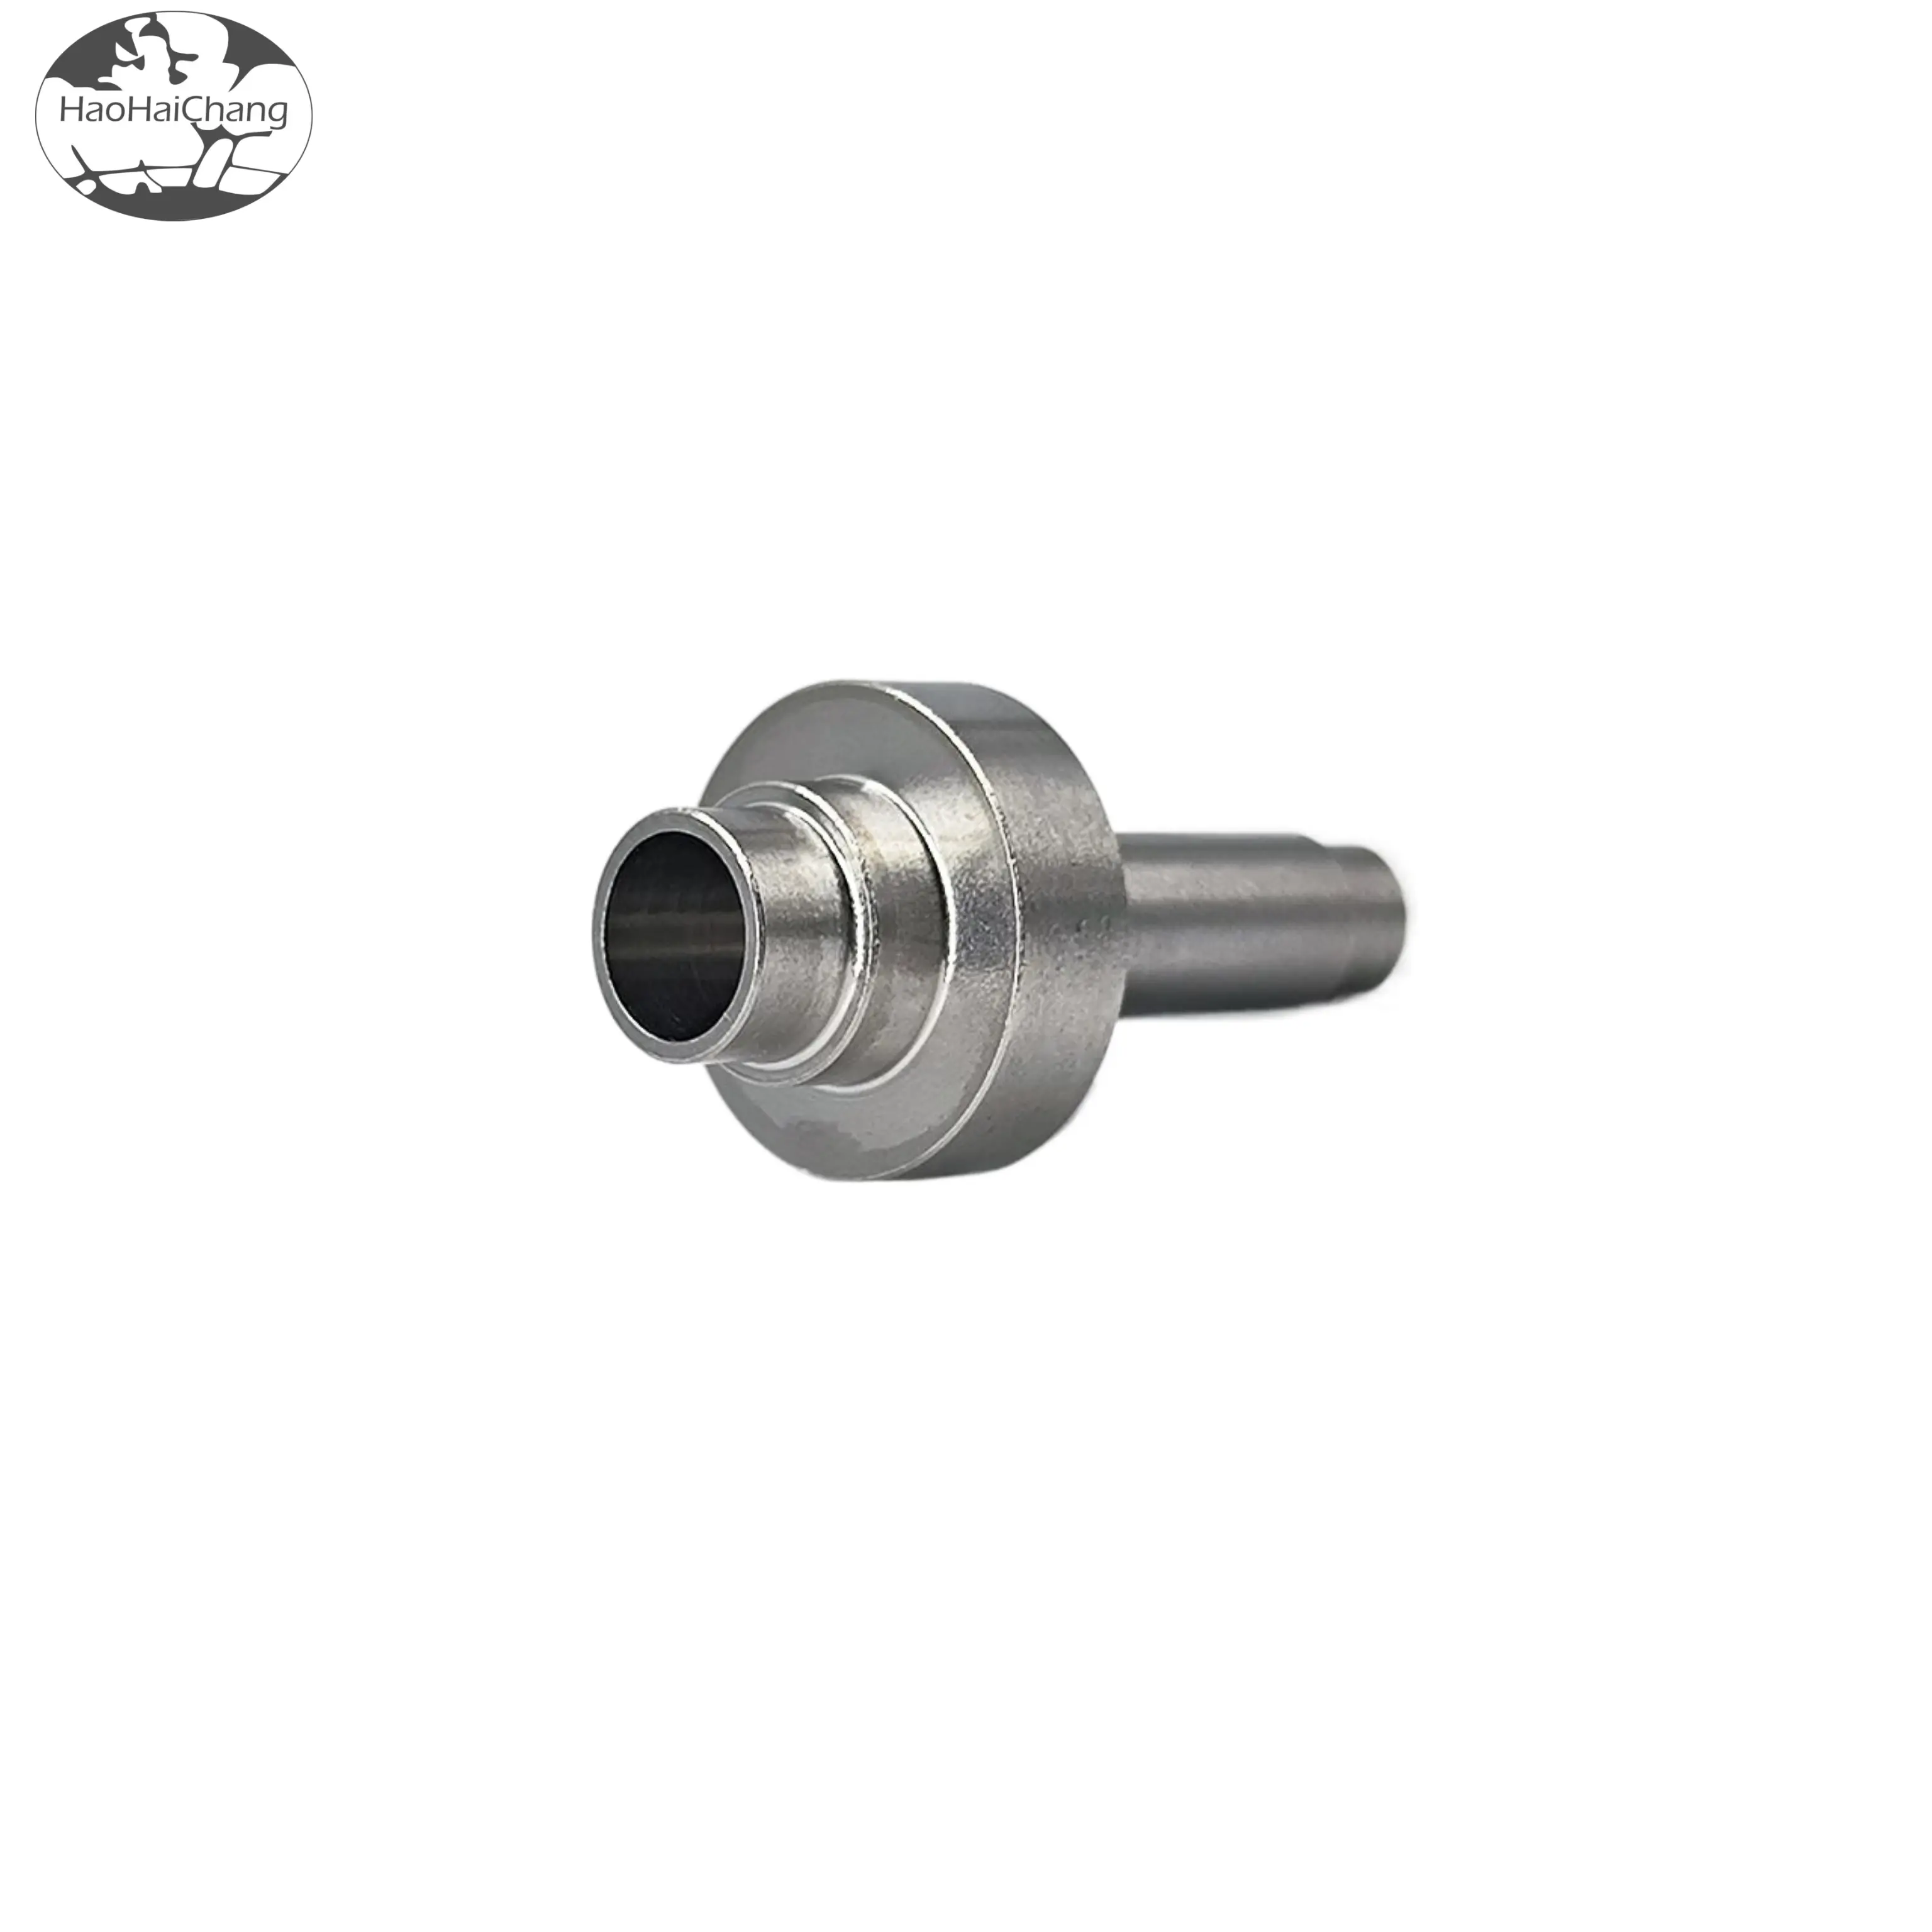 HHC-555 Small Shafts Hollow Stainless Steel Columns